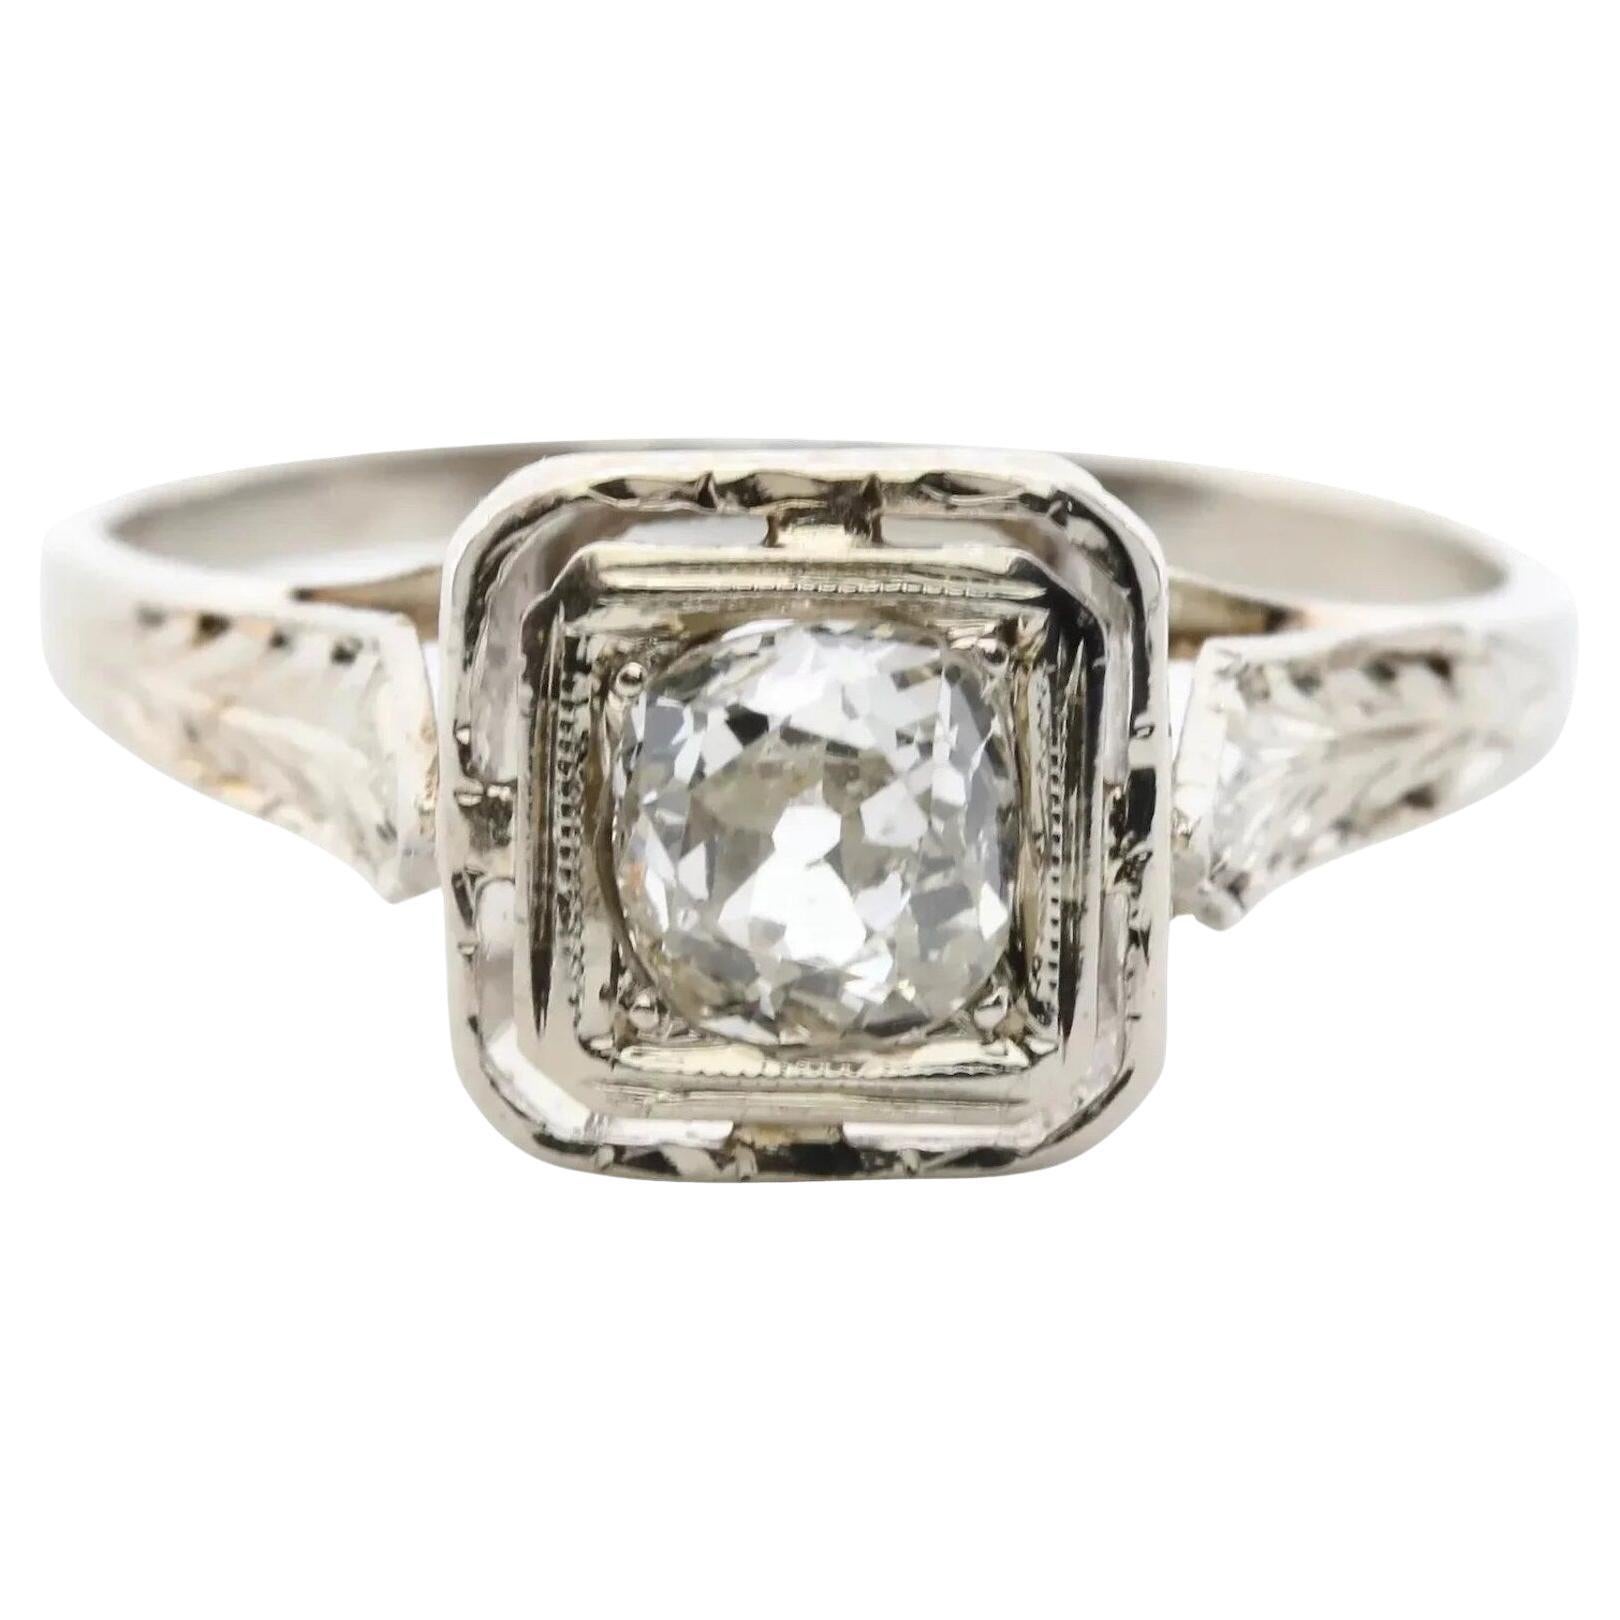 Engraved Art Deco 0.52ct Old Mine Cut Diamond Engagement Ring in 18K White Gold For Sale